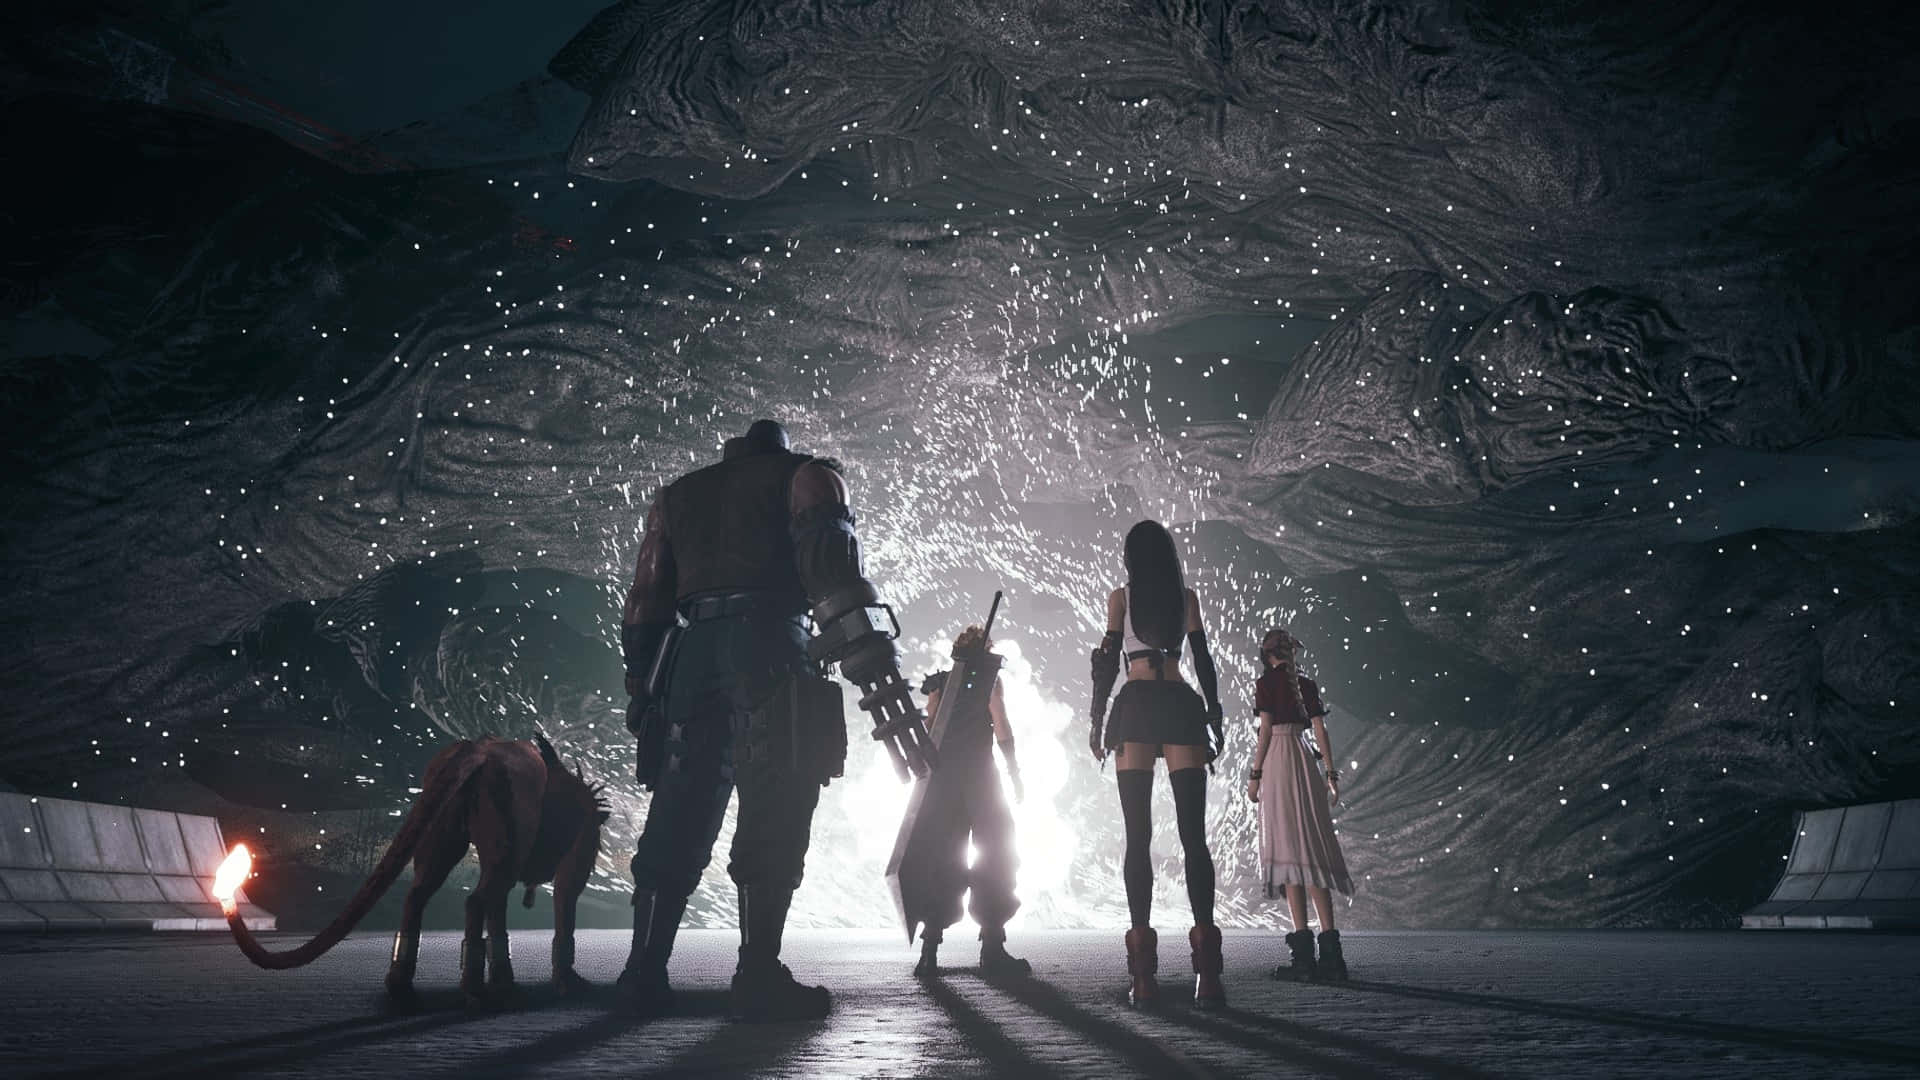 Final Fantasy7 Rebirth Characters Beholding Mysterious Entity Wallpaper